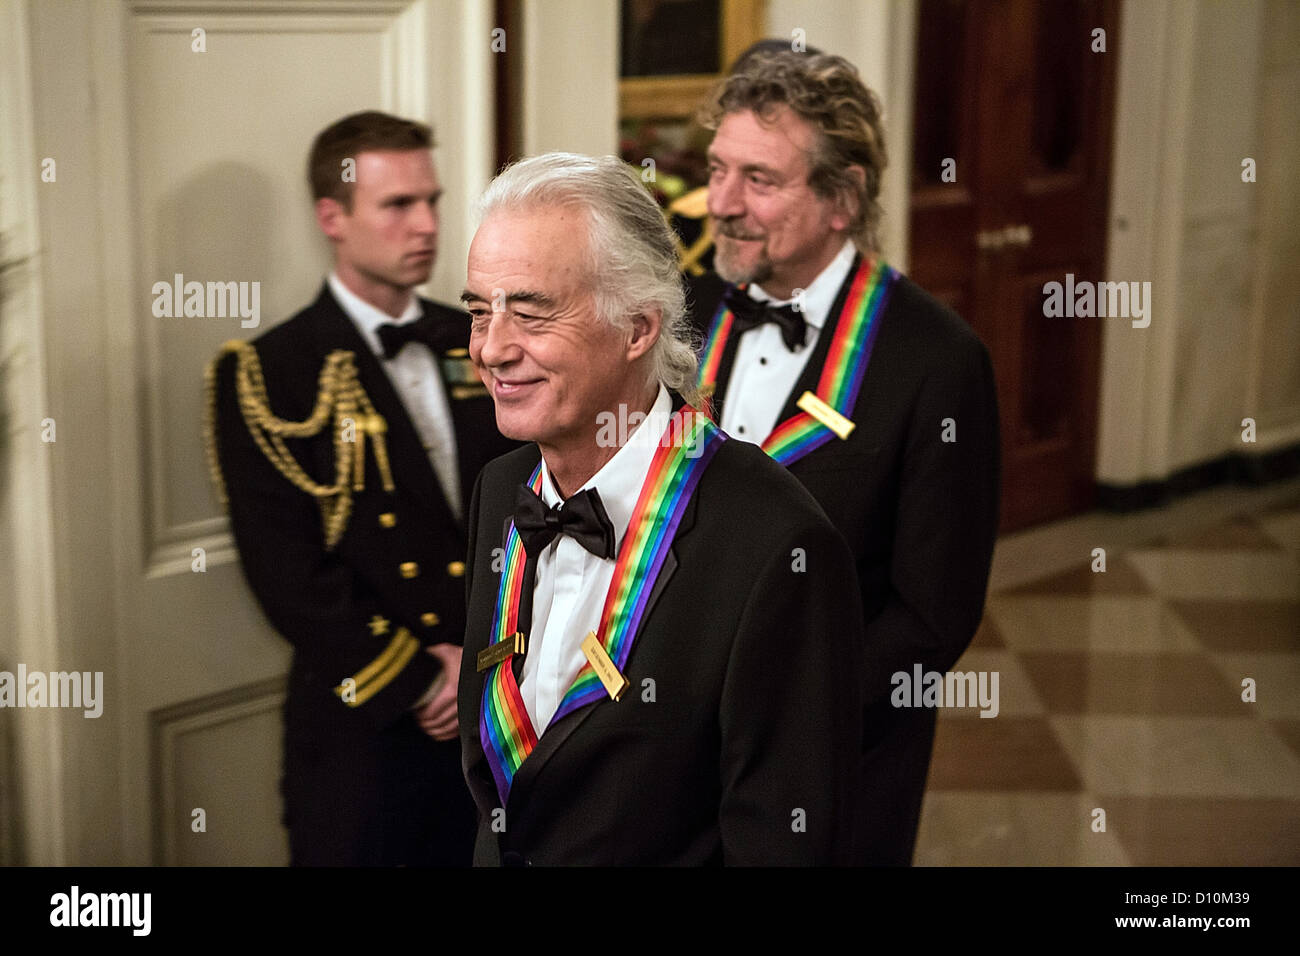 Jimmy Page (L) and Robert Plant of the band Led Zeppelin attend the Kennedy Center Honors reception at the White House on December 2, 2012 in Washington, DC. The Kennedy Center Honors recognized seven individuals - Buddy Guy, Dustin Hoffman, David Letterman, Natalia Makarova, John Paul Jones, Jimmy Page, and Robert Plant - for their lifetime contributions to American culture through the performing arts. .Credit: Brendan Hoffman / Pool via CNP Stock Photo